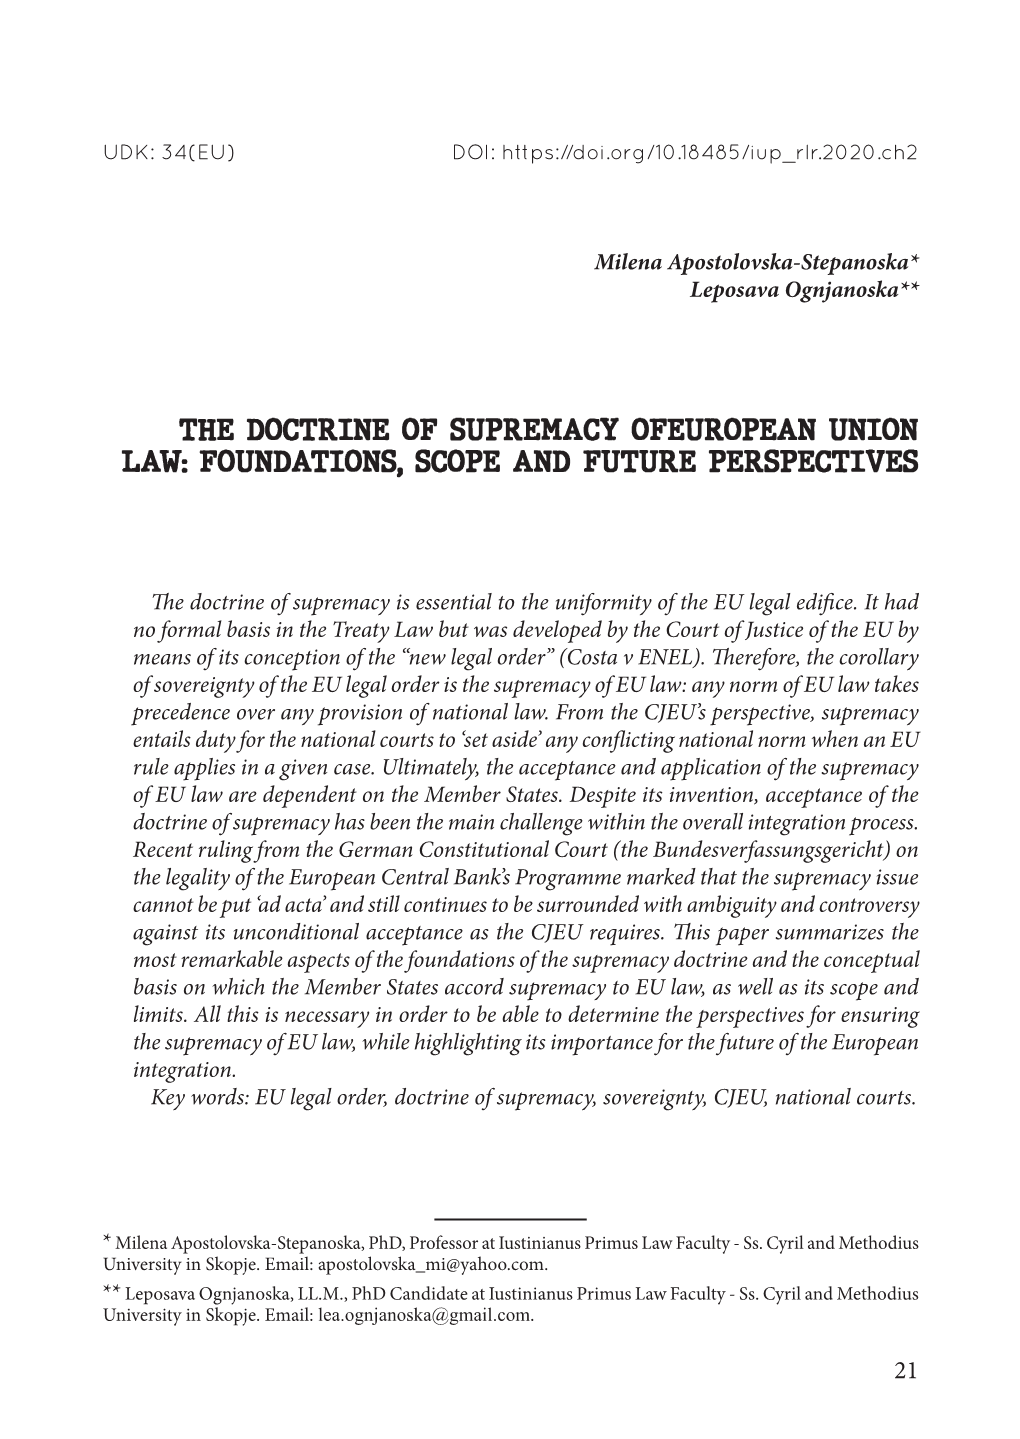 The Doctrine of Supremacy Ofeuropean Union Law: Foundations, Scope and Future Perspectives